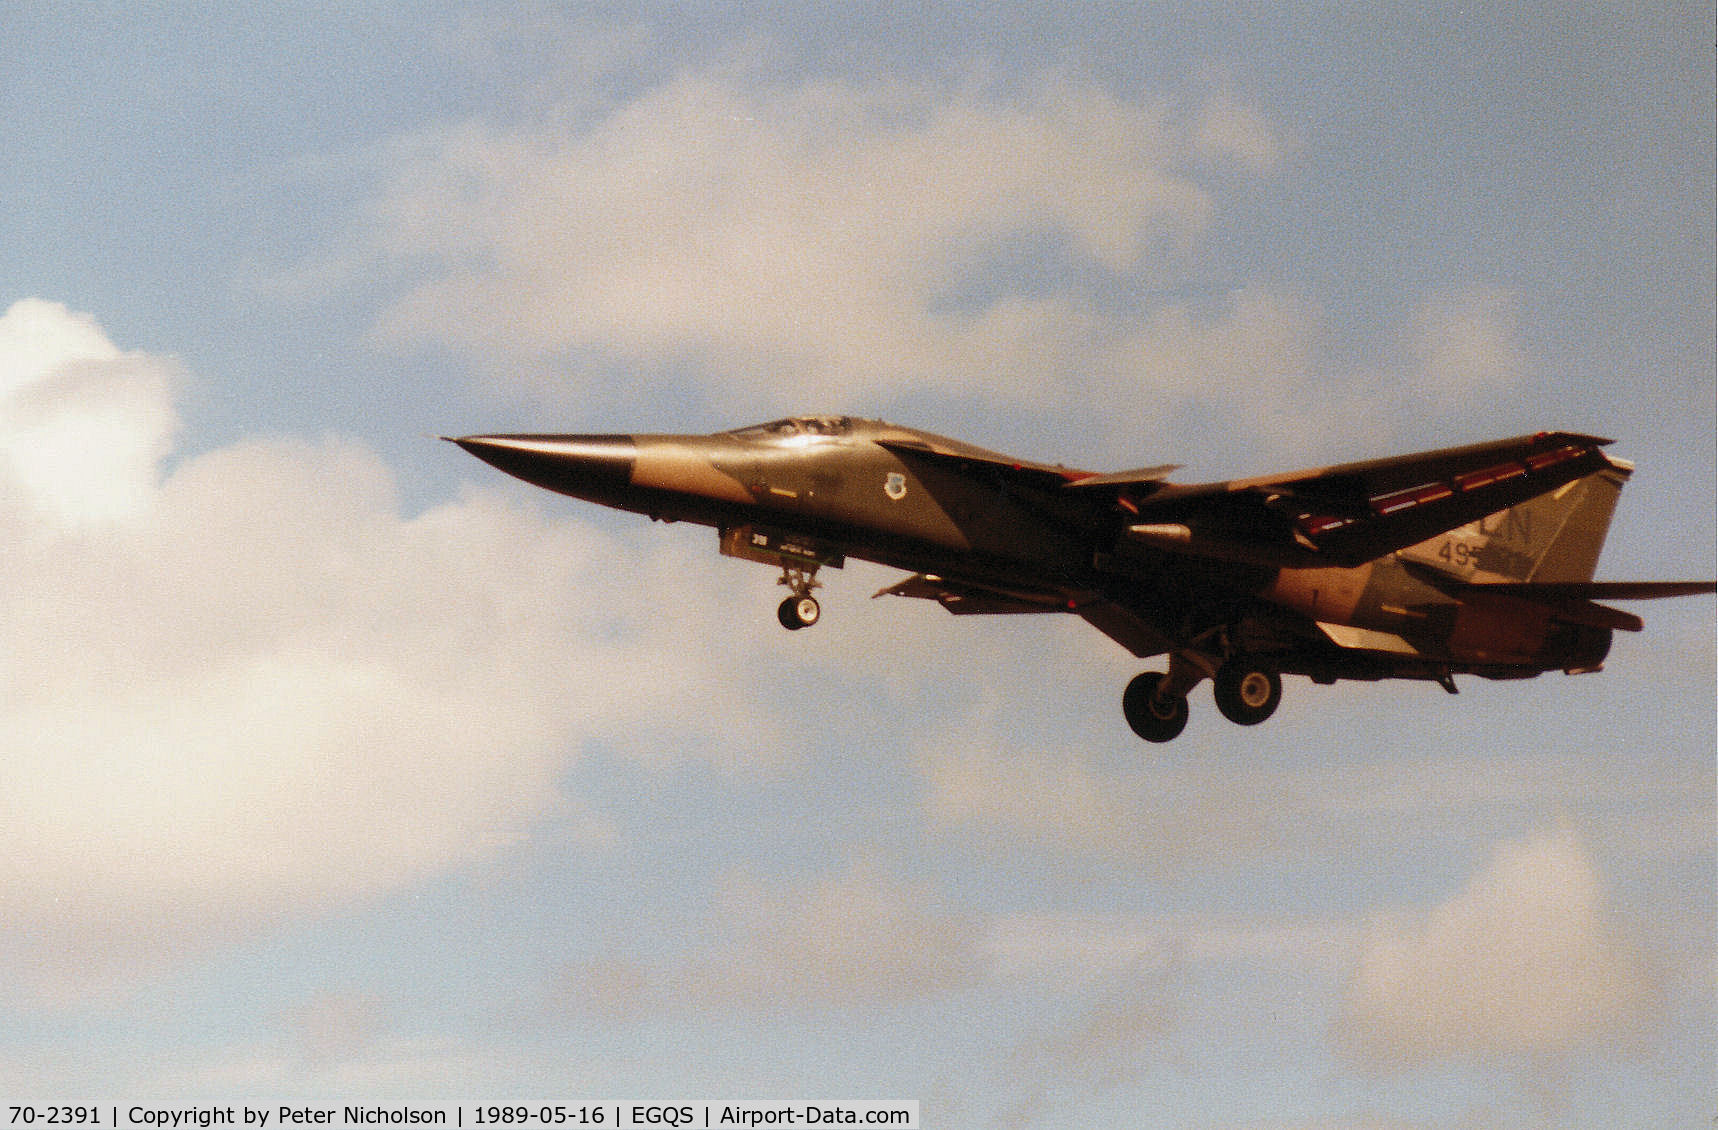 70-2391, 1970 General Dynamics F-111F Aardvark C/N E2-30, F-111F of 495th Tactical Fighter Squadron of the 48th Tactical Fighter Wing based at RAF Lakenheath on final approach to RAF Lossiemouth in May 1989.